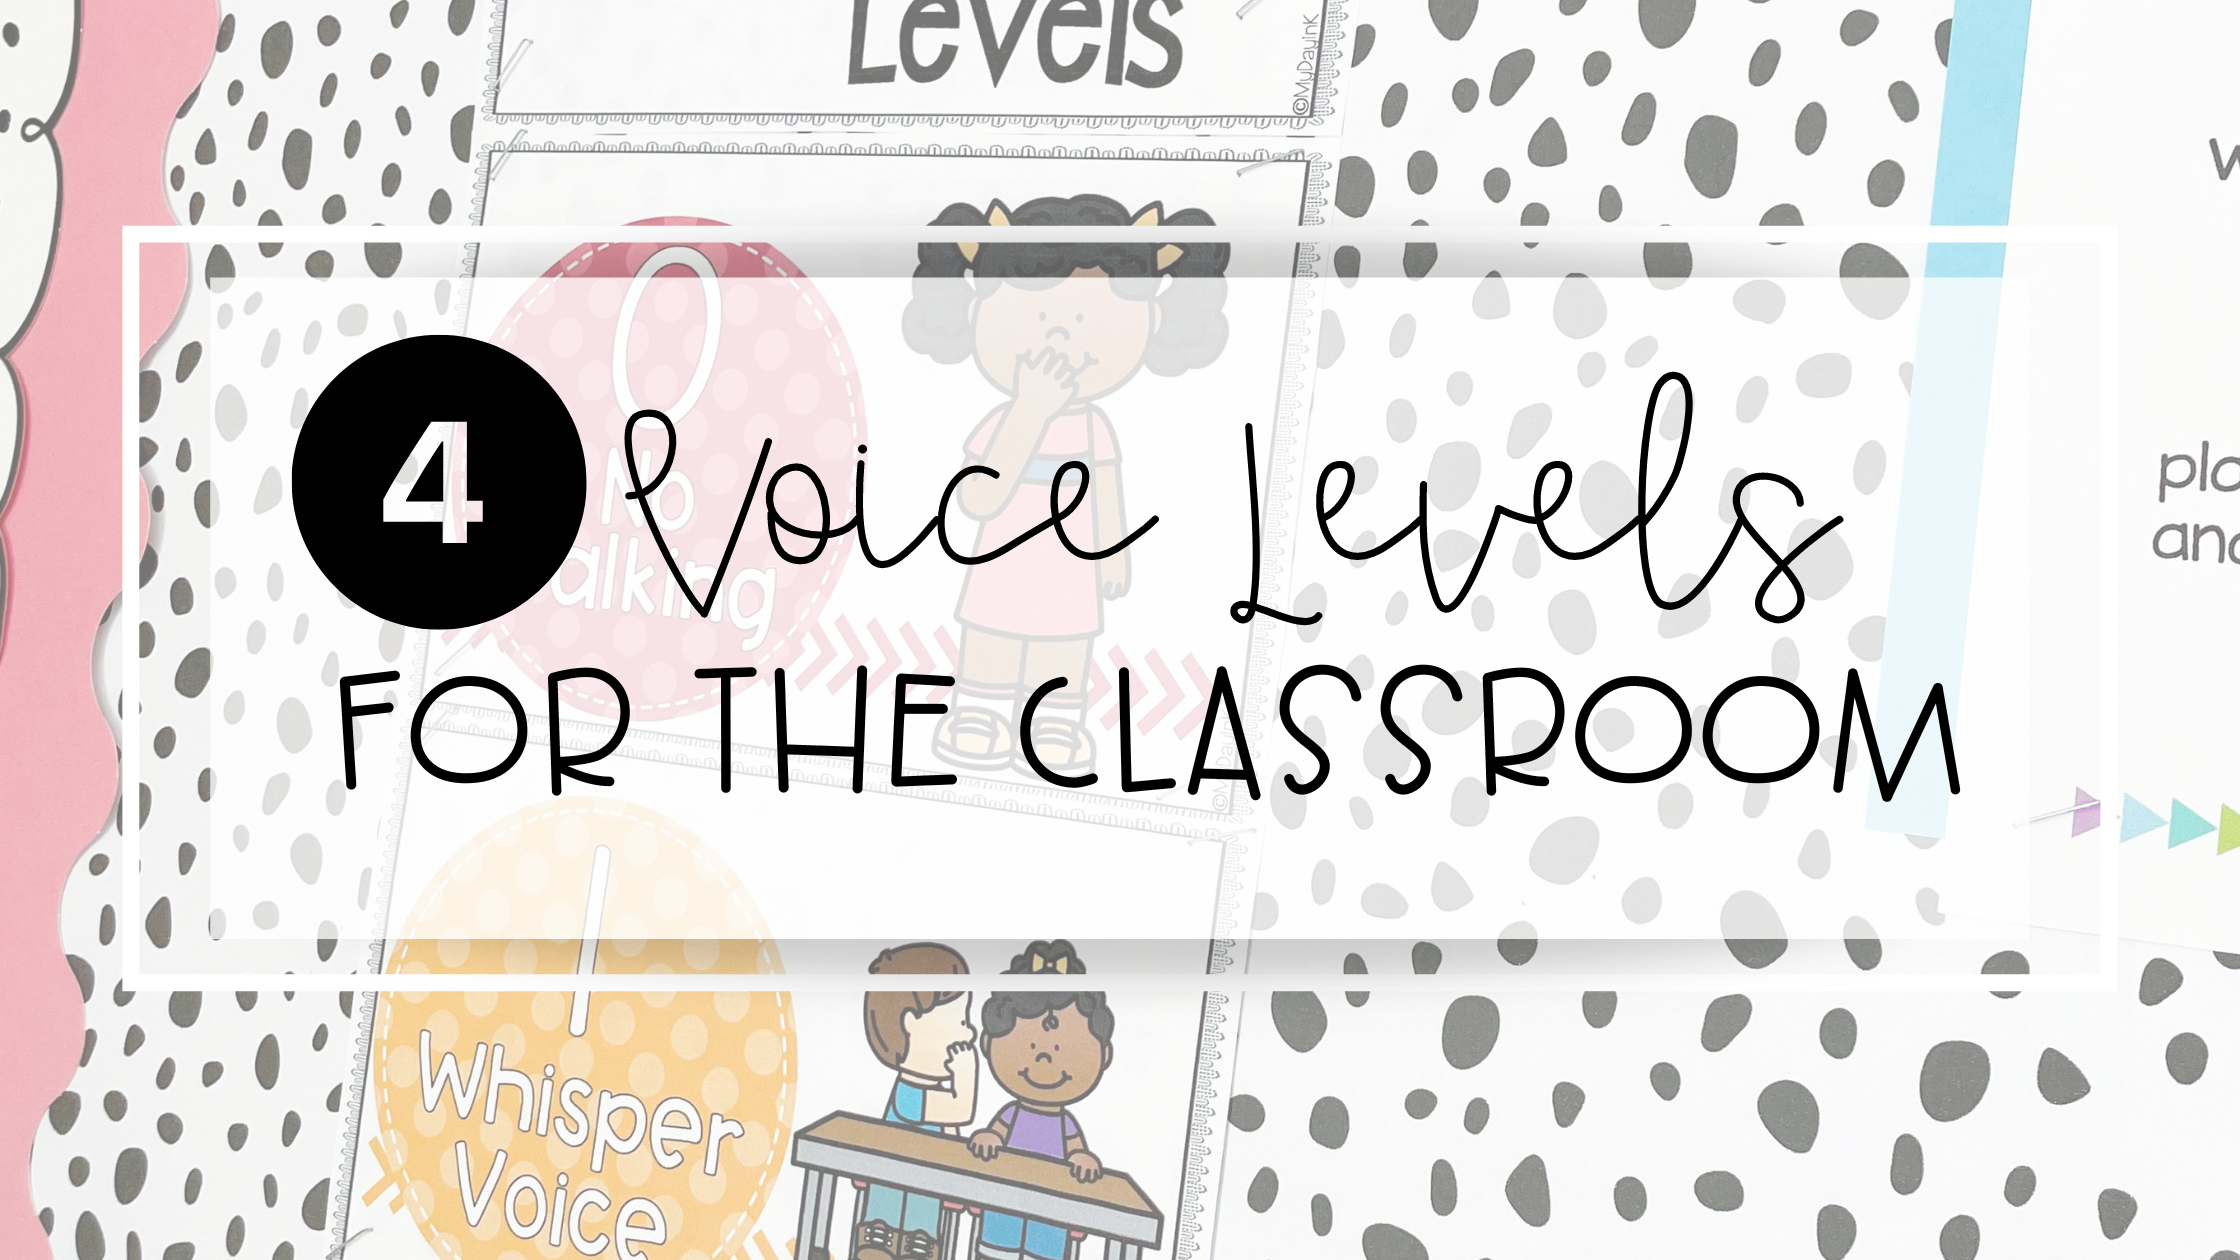 Mastering the Art of the 4 Voice Levels in the Classroom: A Guide for Teachers